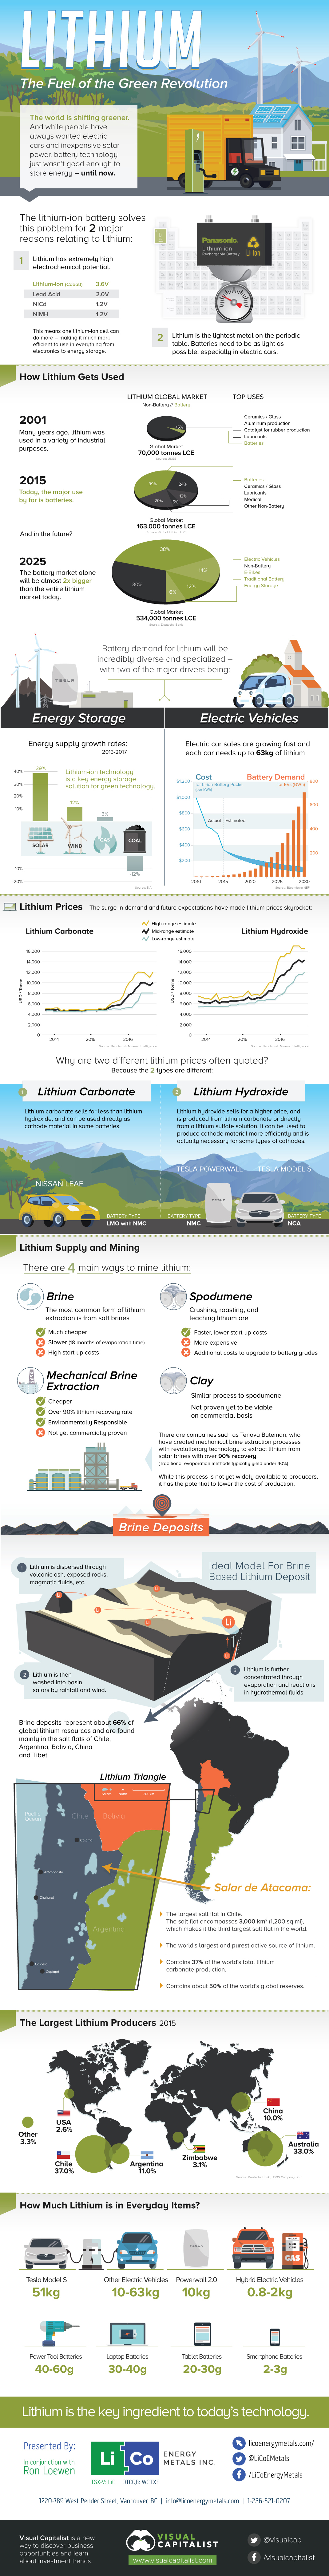 Lithium: The Fuel of the Green Revolution